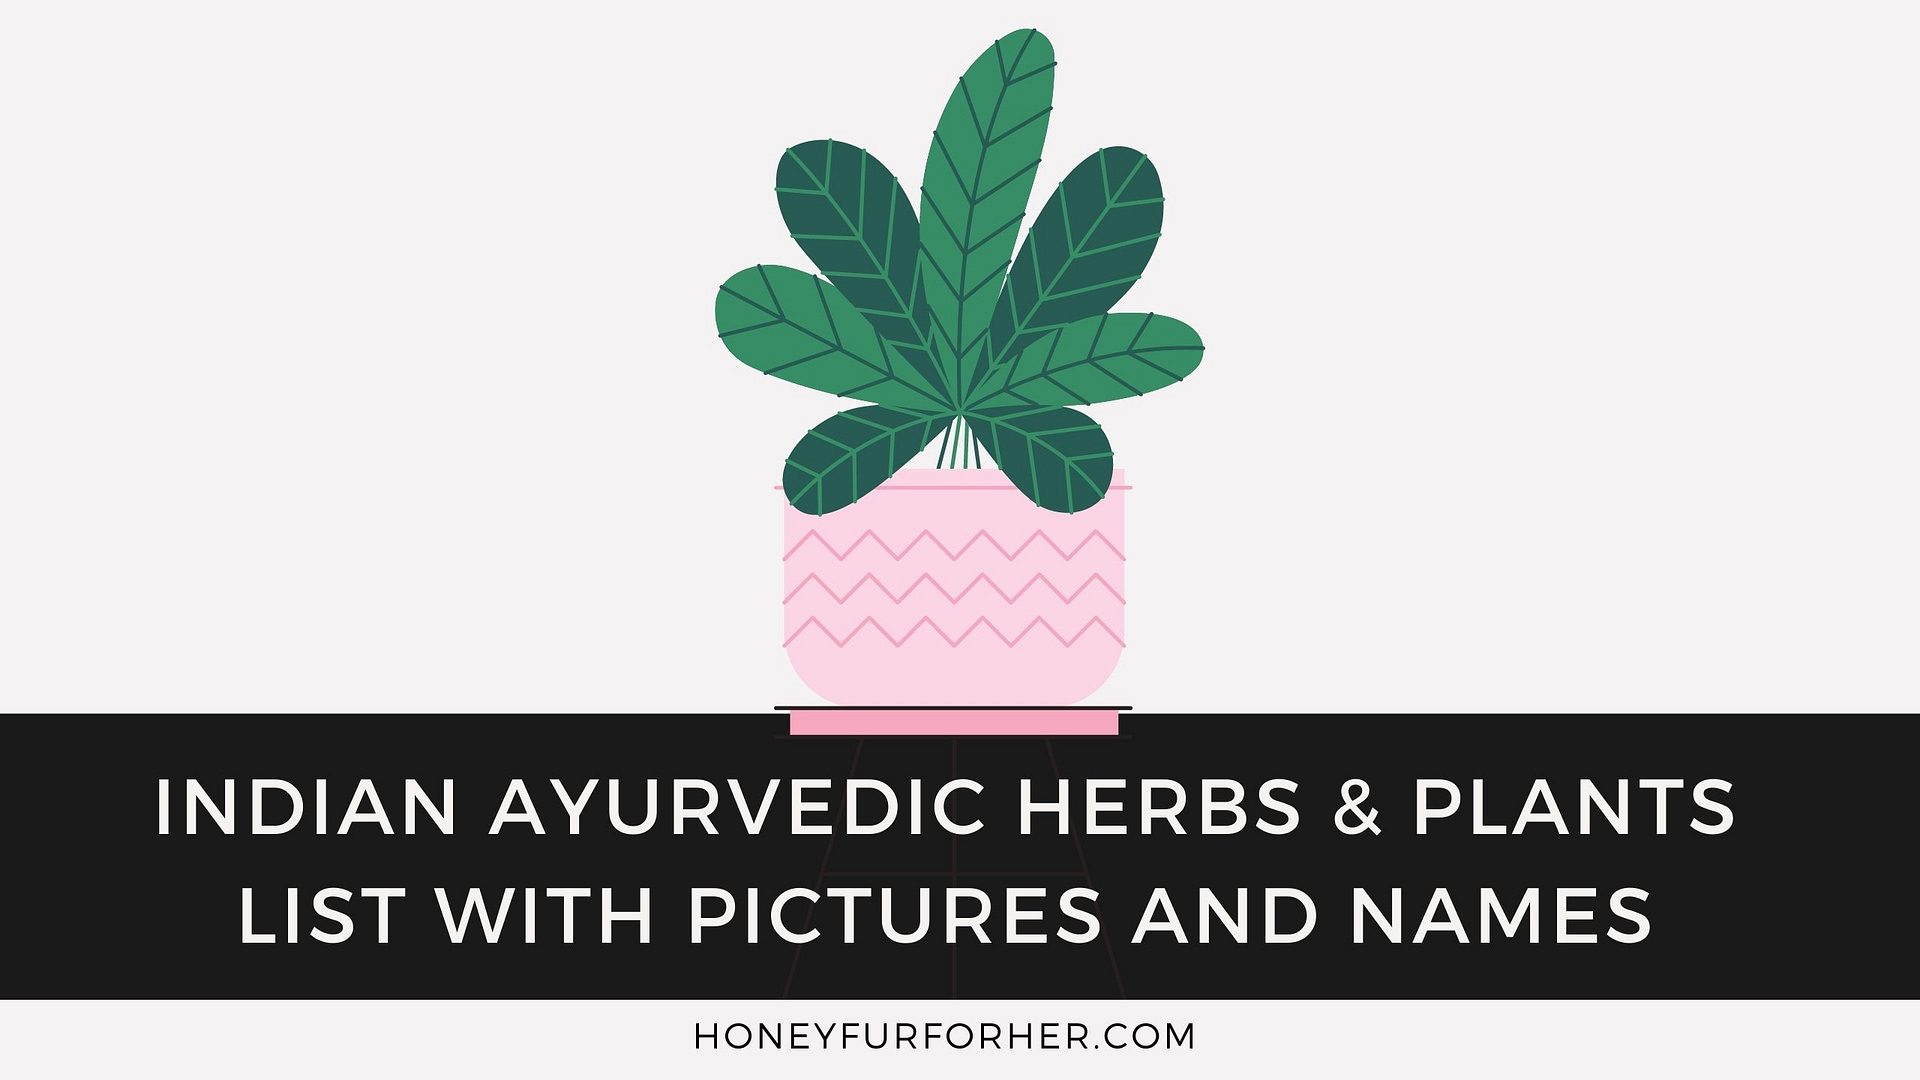 Indian Ayurvedic Herbs & Plants List With Pictures And Names Feature Image